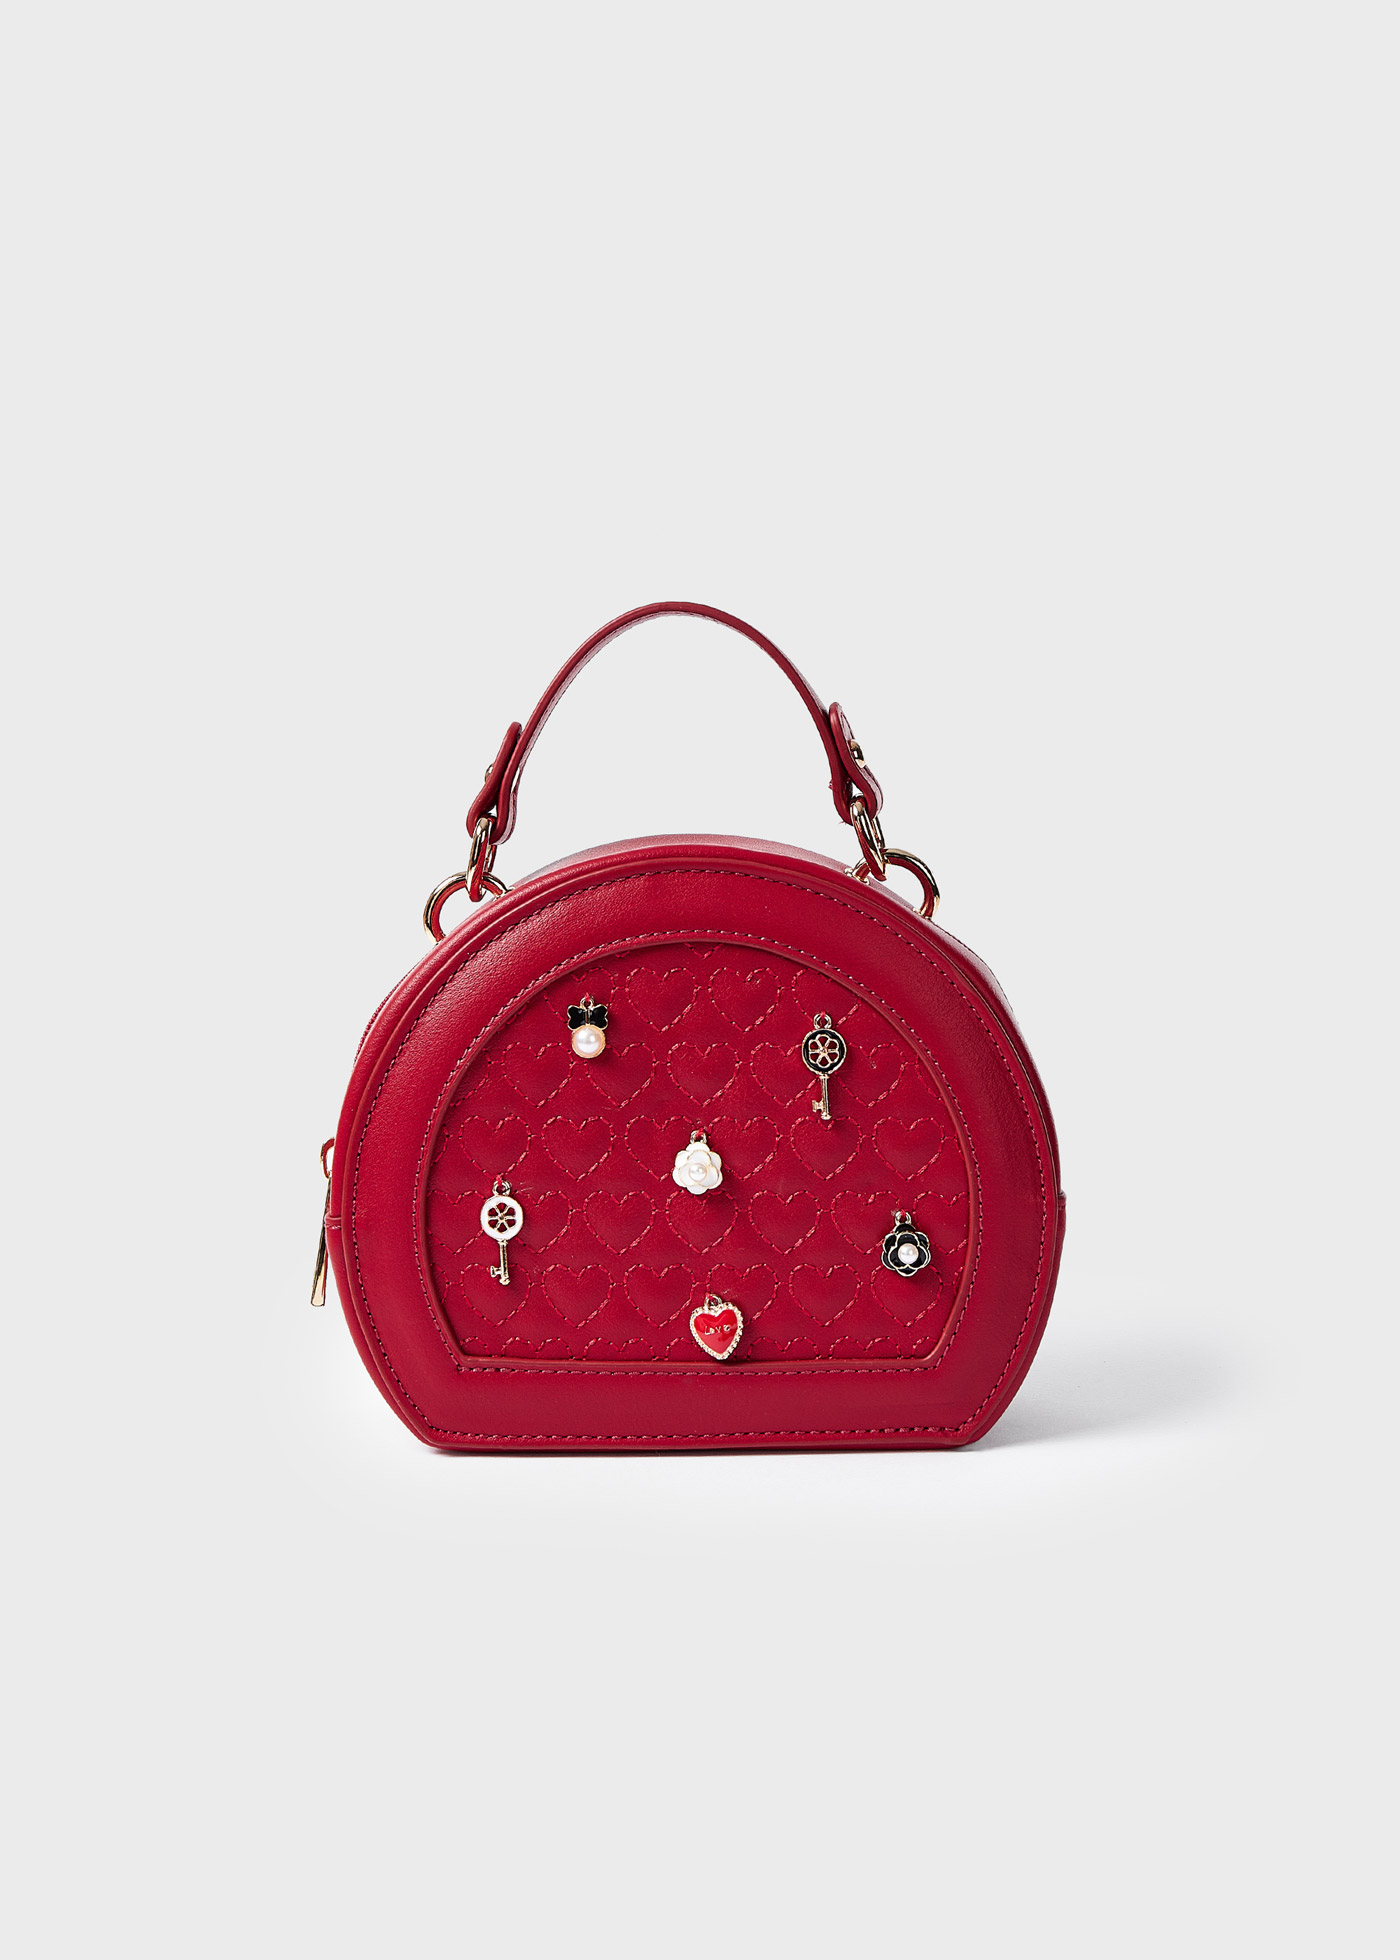 Quilted Red Heart Crossbody Bag